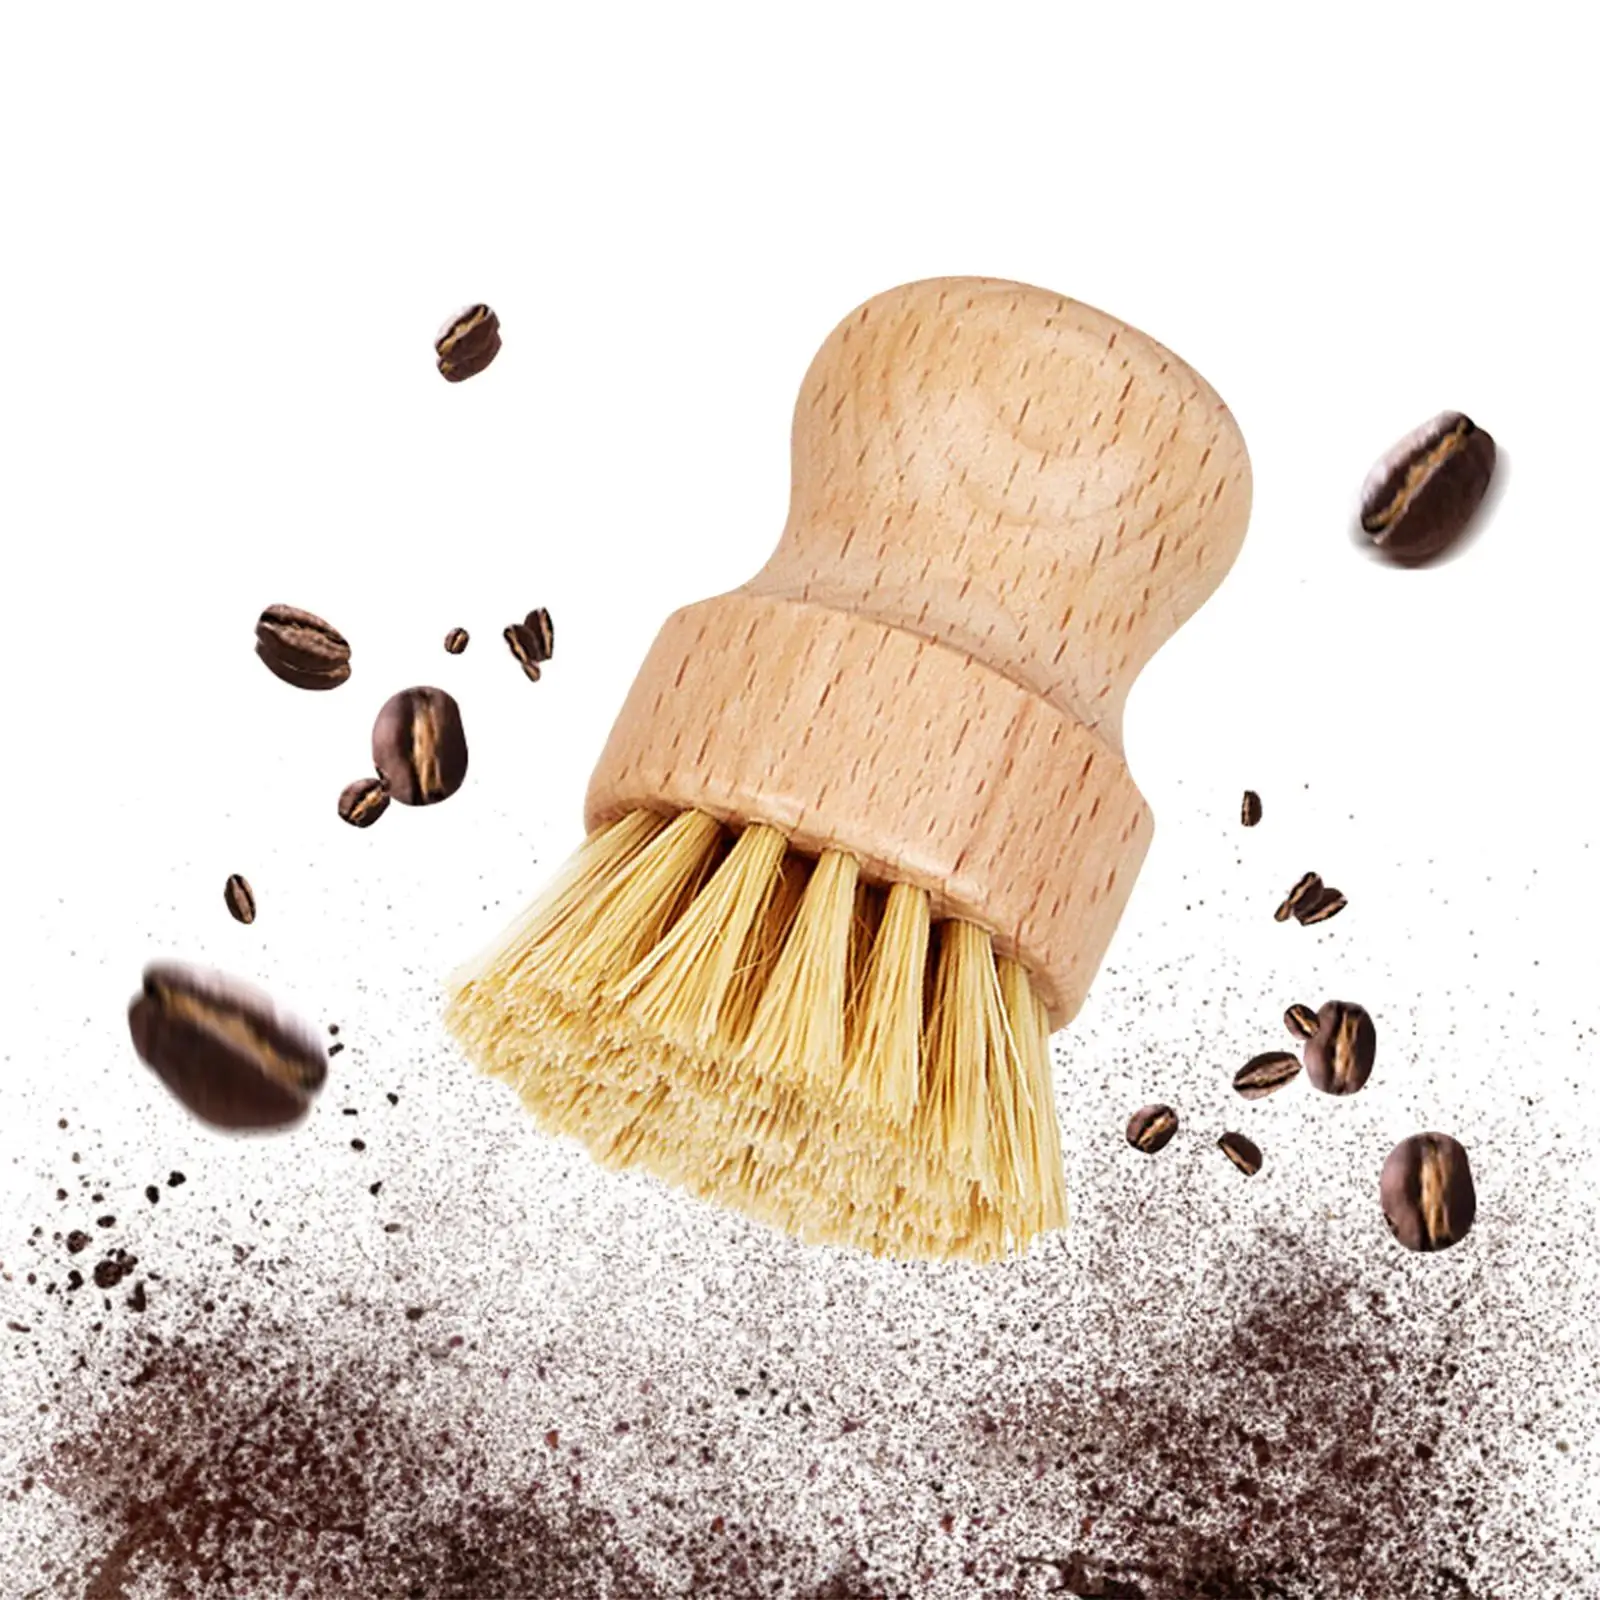 Washing Scrubber Japanese Short Wooden Round Washing Tidy Cleaner Cleaning Brush Kitchen Gadgets for Espresso Machine Pot Pan